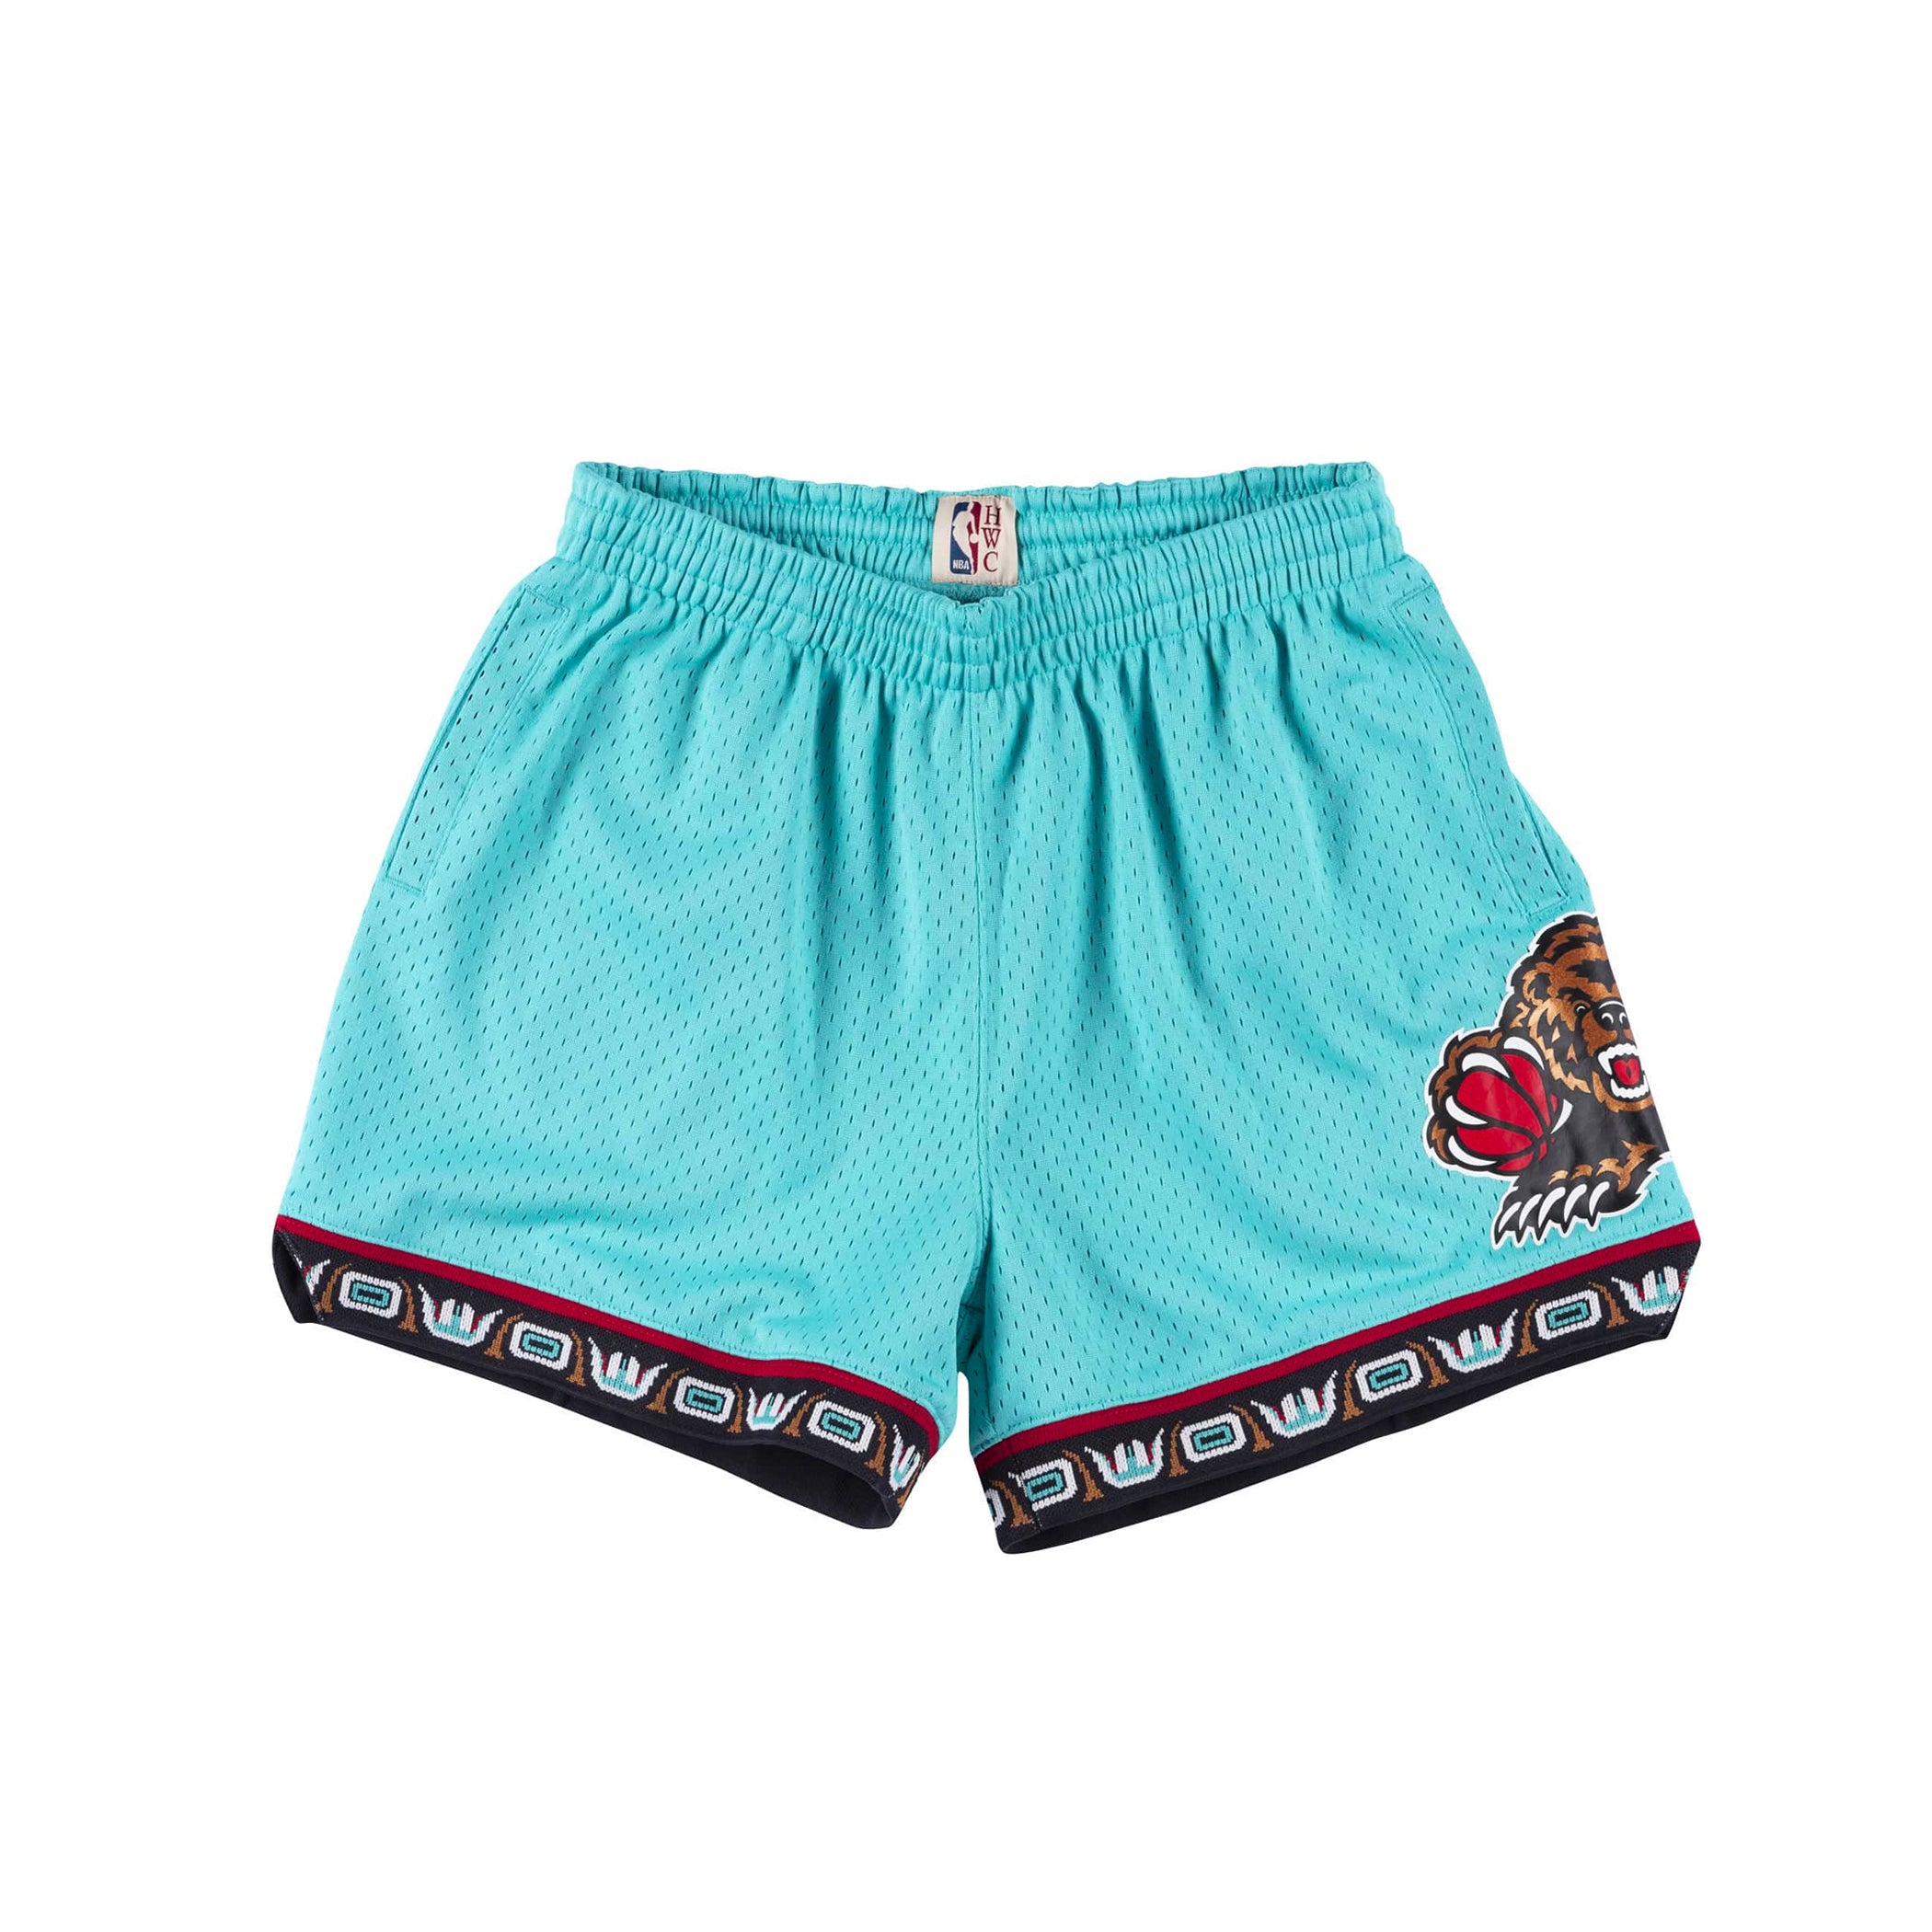 memphis grizzlies mitchell and ness shorts